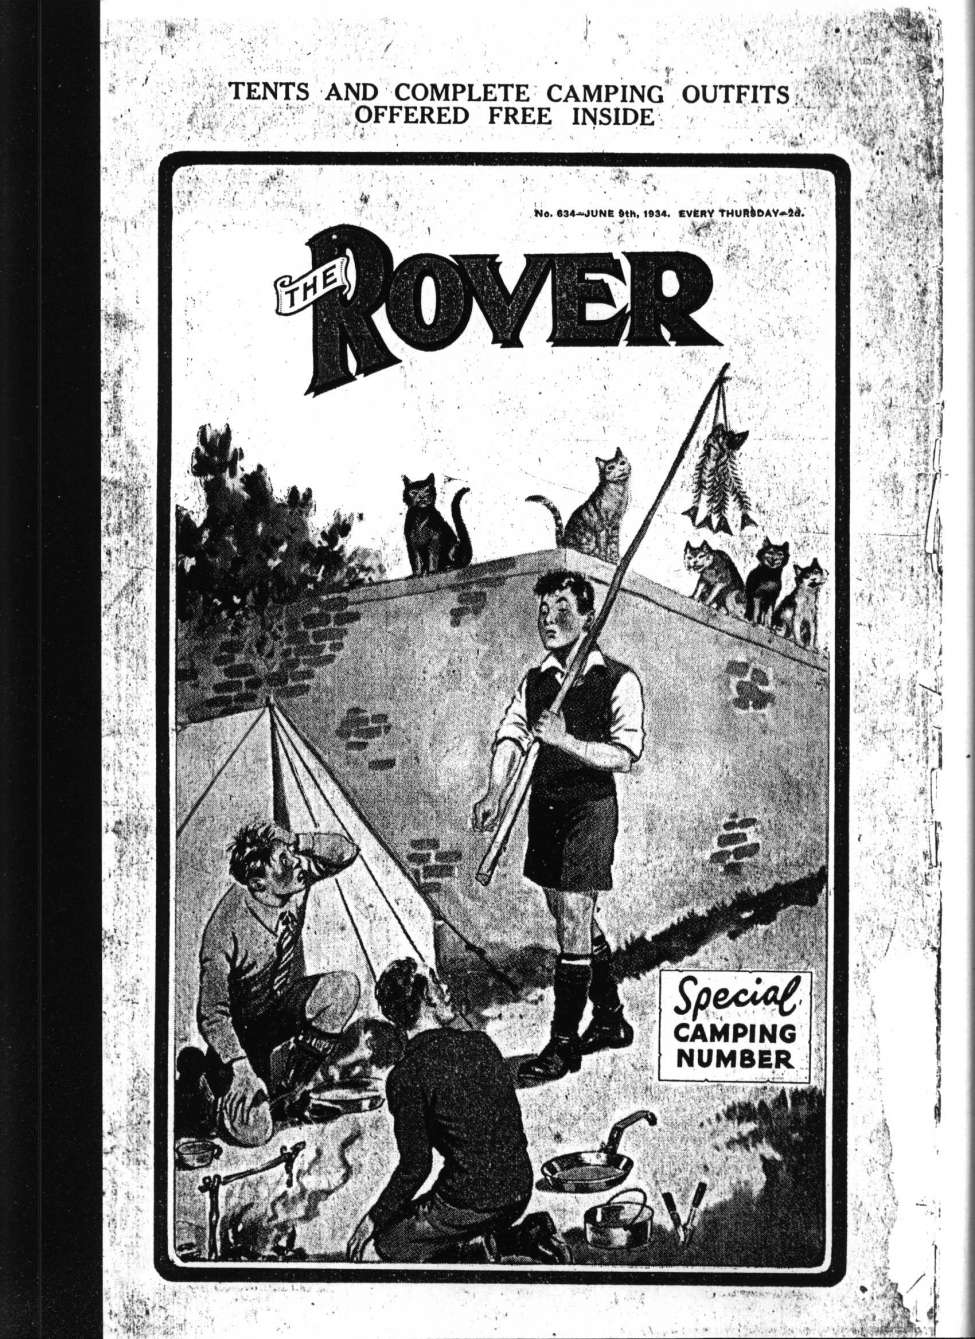 Book Cover For The Rover 634